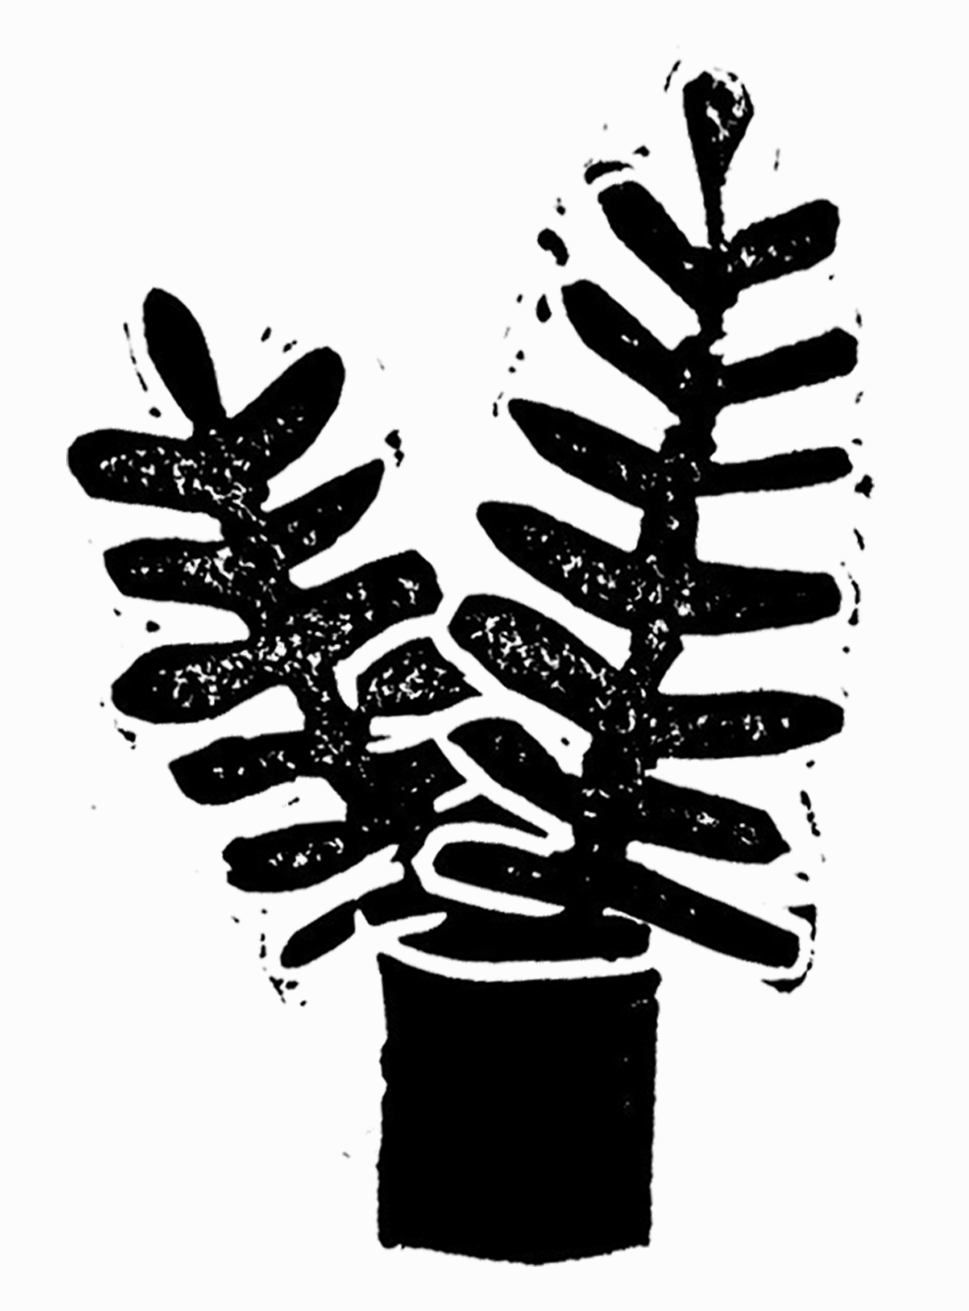 Somewhat grainy black-and-white linocut print of a simply stylized fern in a pot, centered on a slightly off-white background.